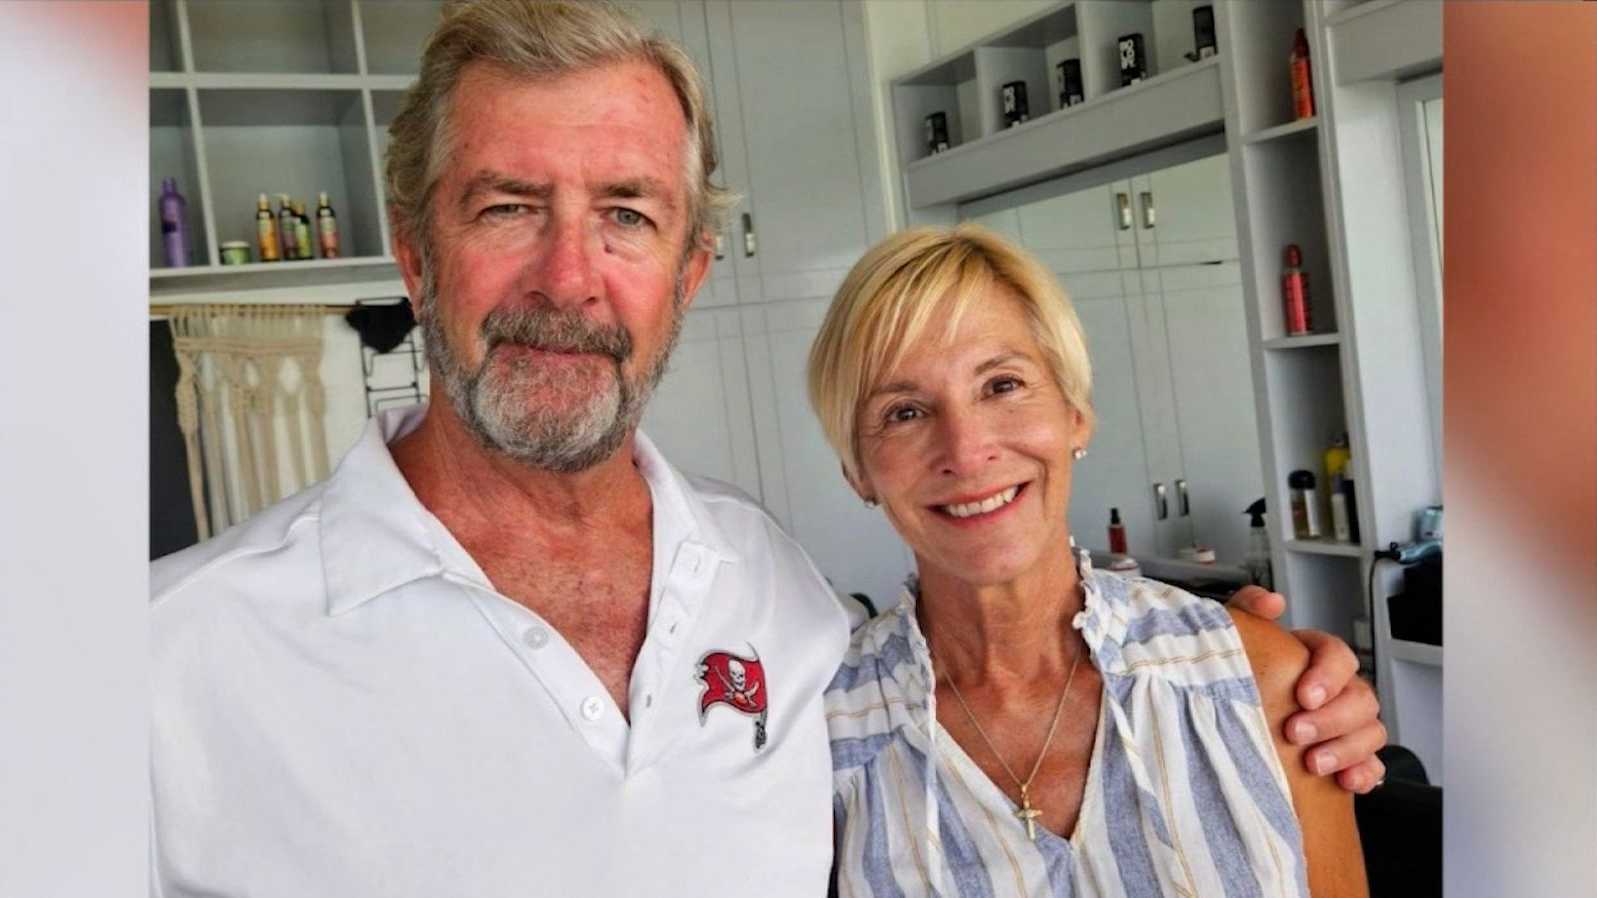 US couple whose yacht was hijacked in Grenada were likely thrown overboard and died, police say